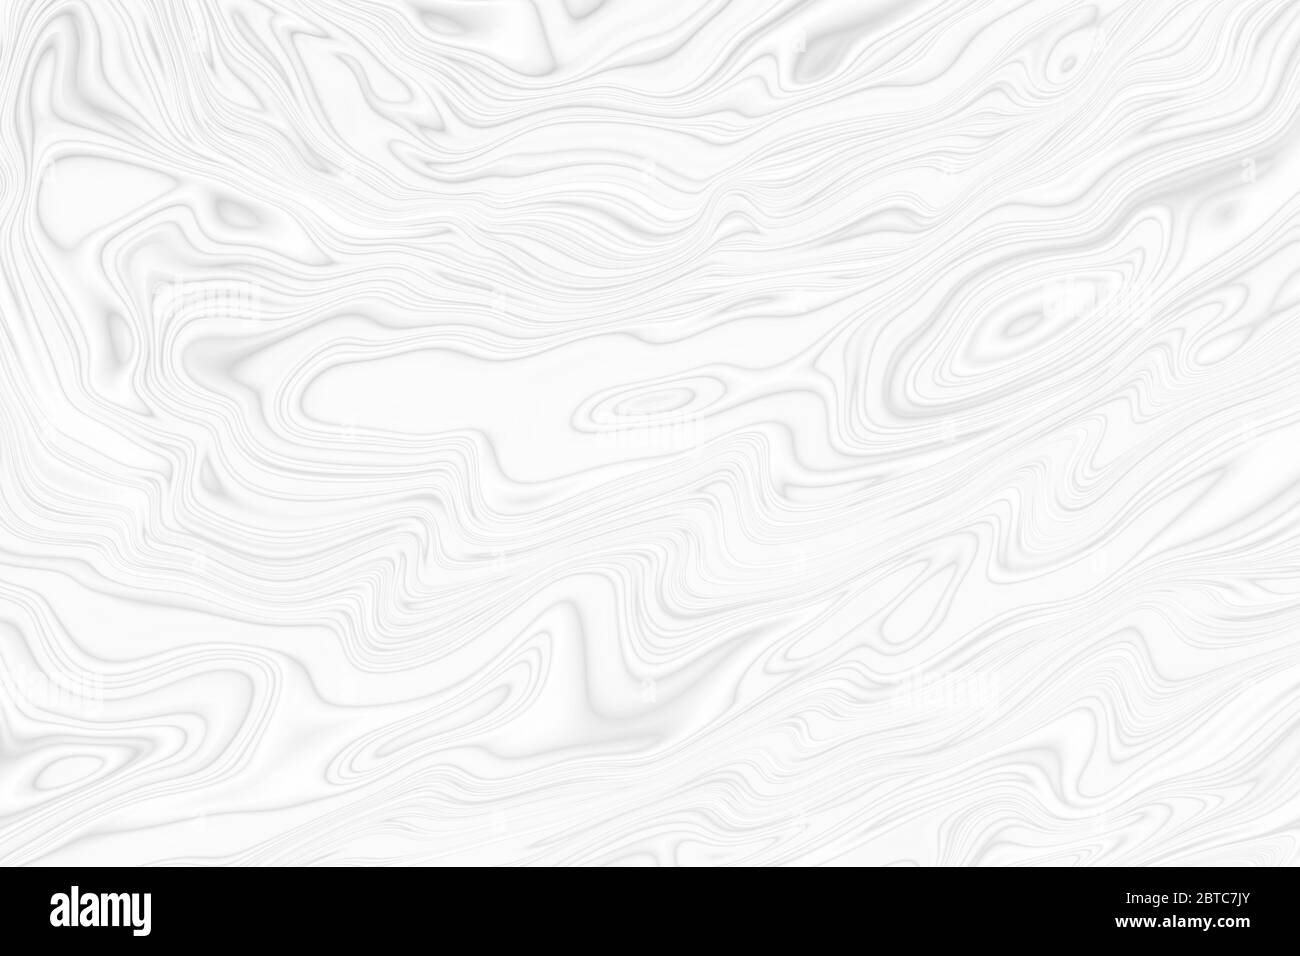 Black and white abstract acrylic pouring paint texture background for design artwork or decoration Stock Photo